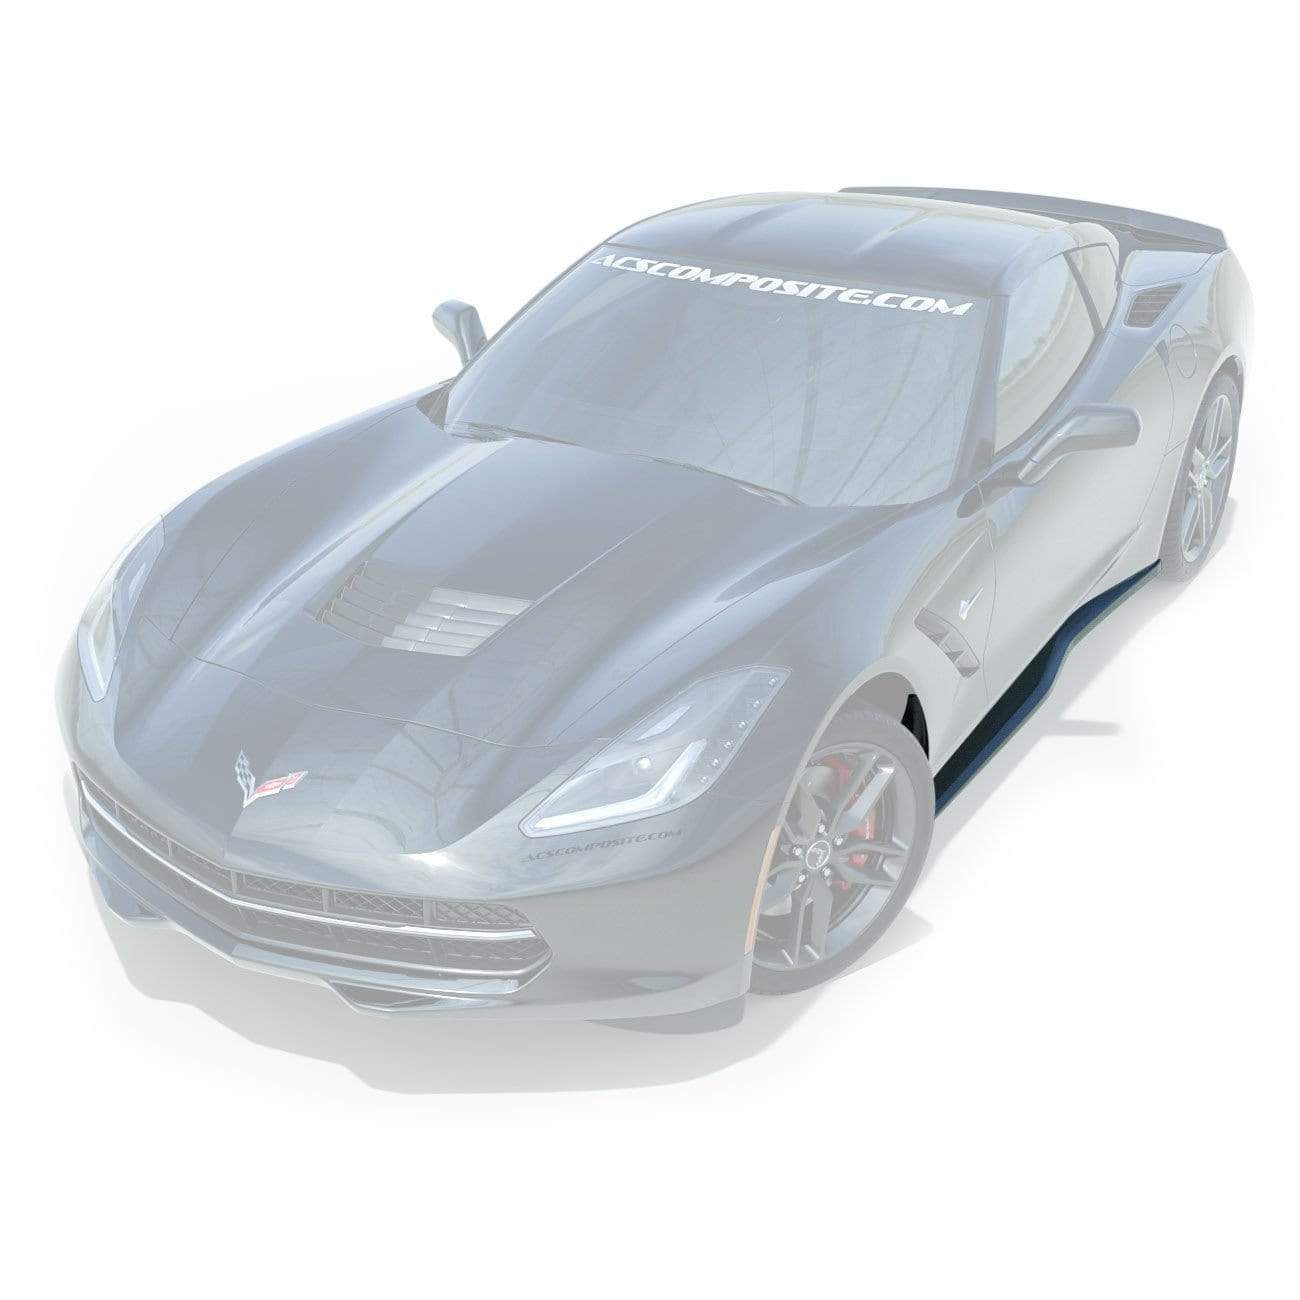 ACS Composite Carbon Fiber Z06 Rockers [45-8-161] for Corvette Stingray, Grand Sport, and Z06. Visible carbon fiber side rockers for improved aerodynamics and style.